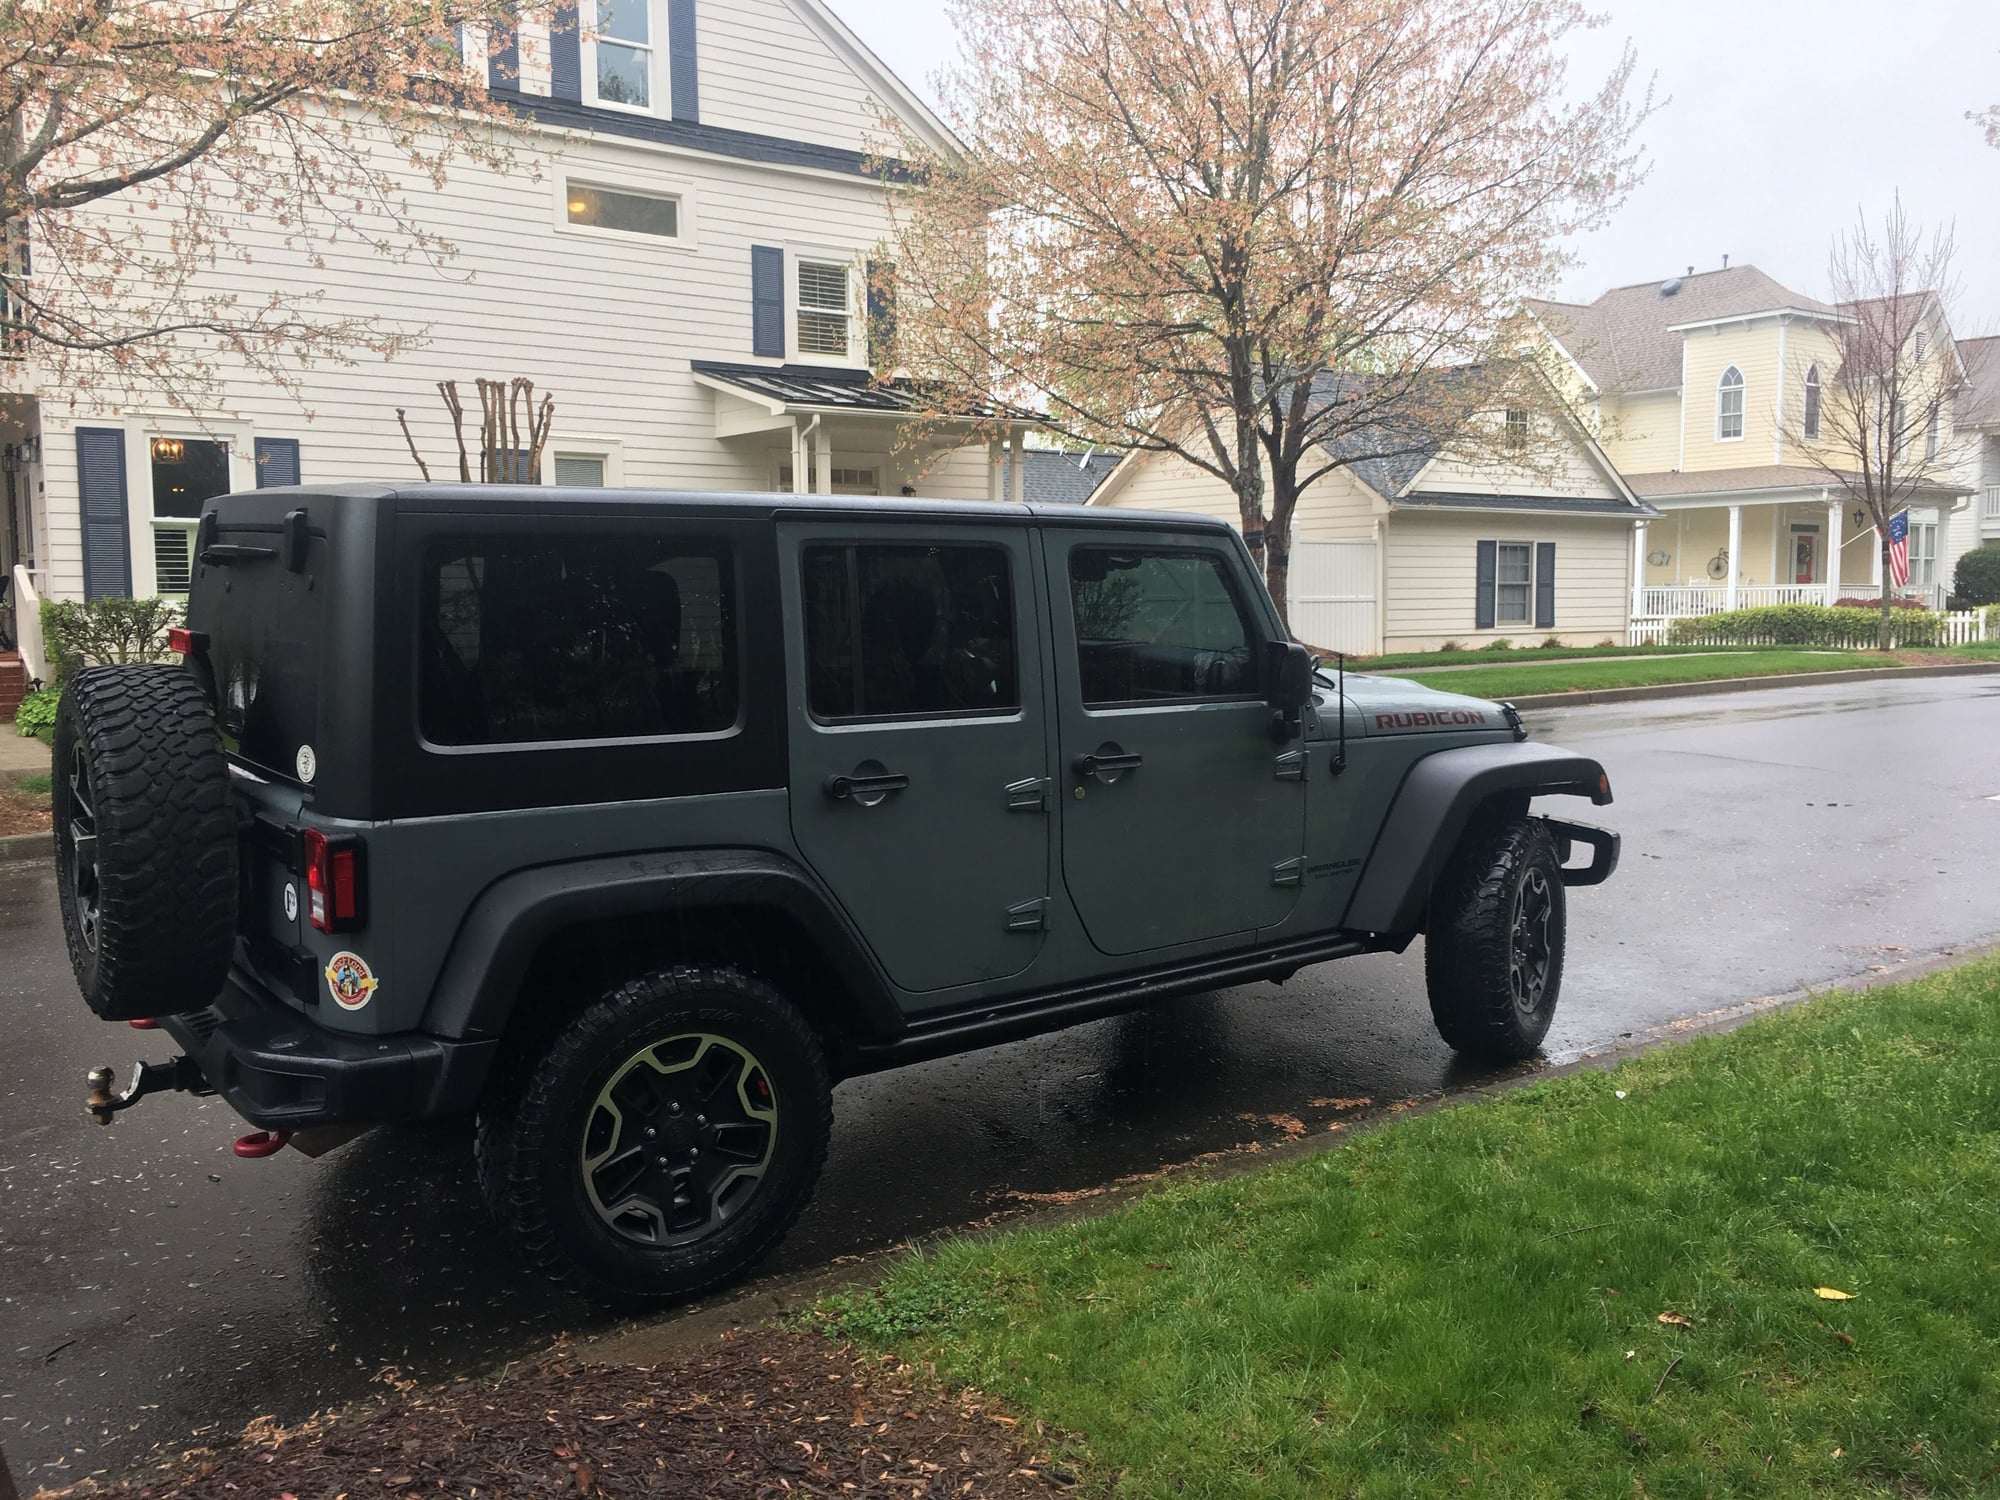 2015 Jeep  - 2015 Jeep Wrangler Unlimited Rubicon Hardrock Anvil Black 6 speed - Used - VIN 1C4BJWFG0FL655814 - 30,000 Miles - 6 cyl - 4WD - Manual - SUV - Gray - Fort Mill, SC 29708, United States